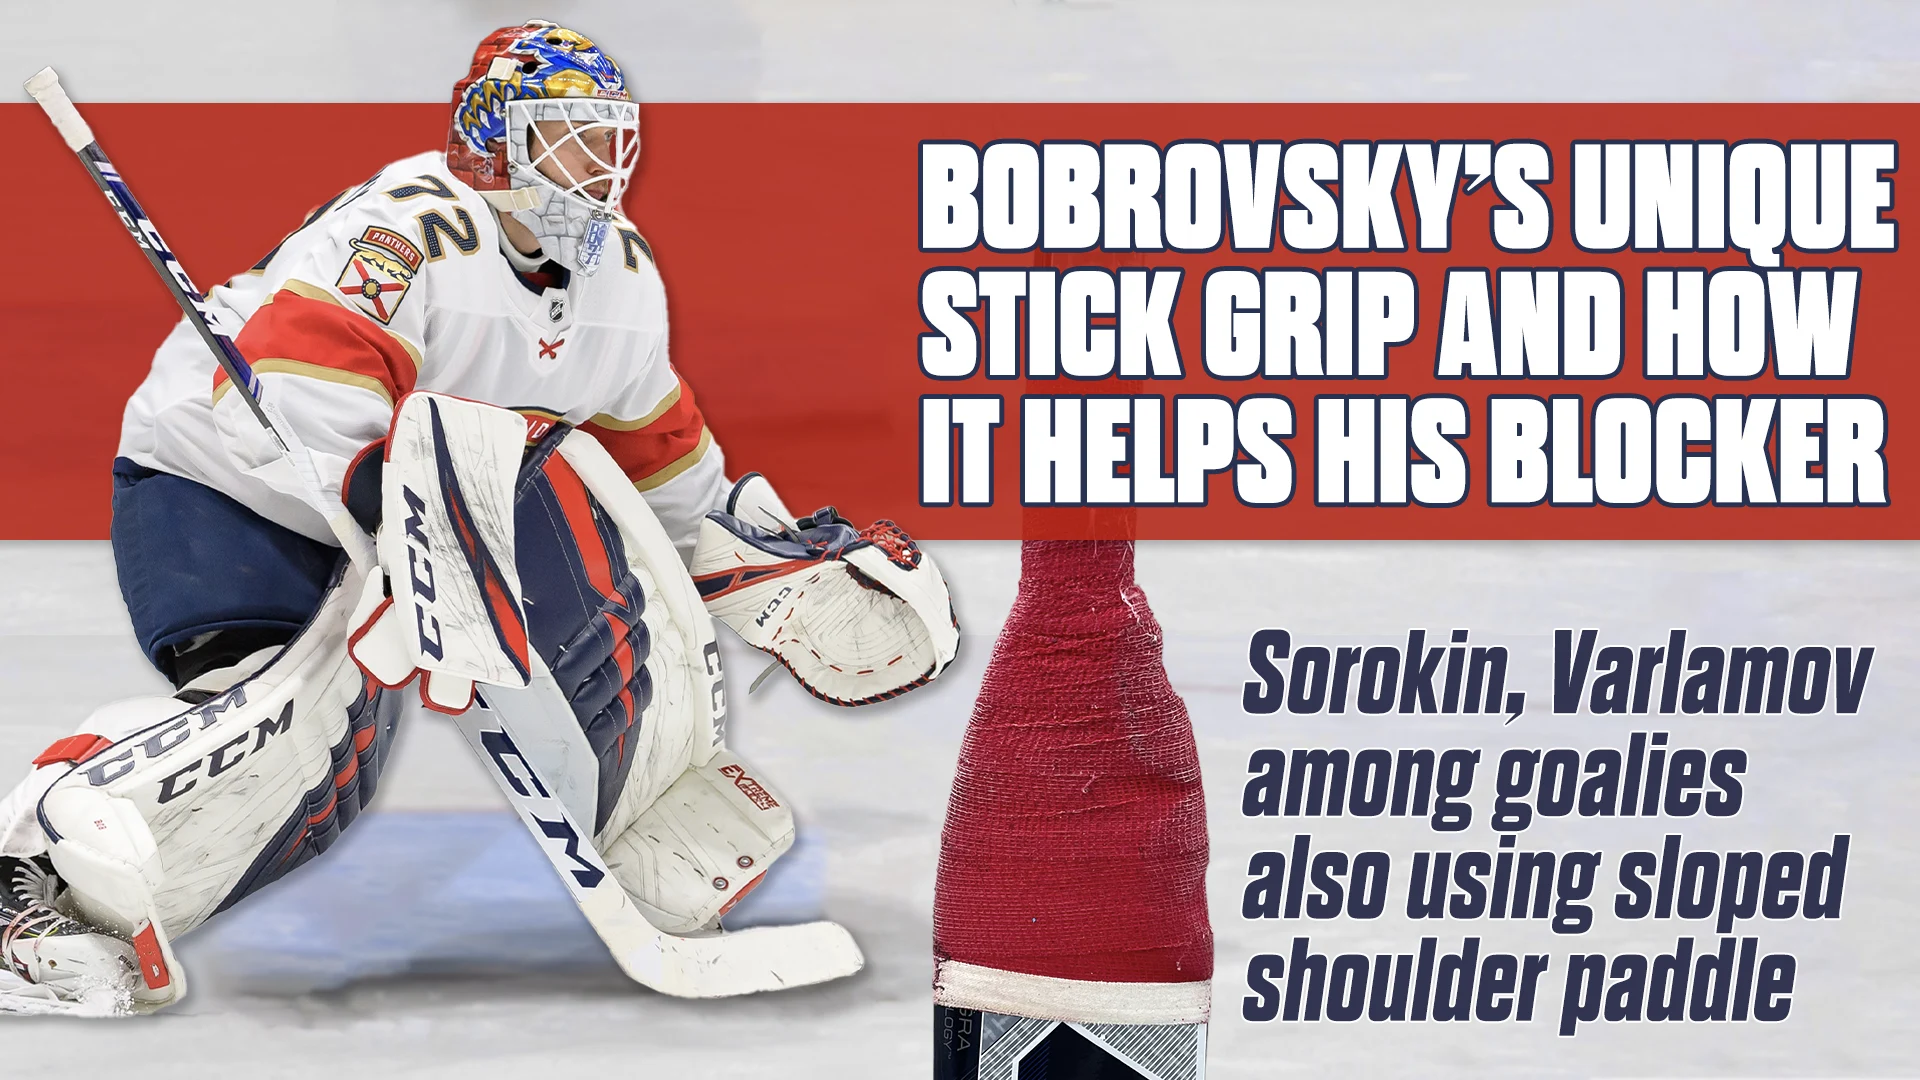 Bobrovsky unique stick grip and how it helps blocker